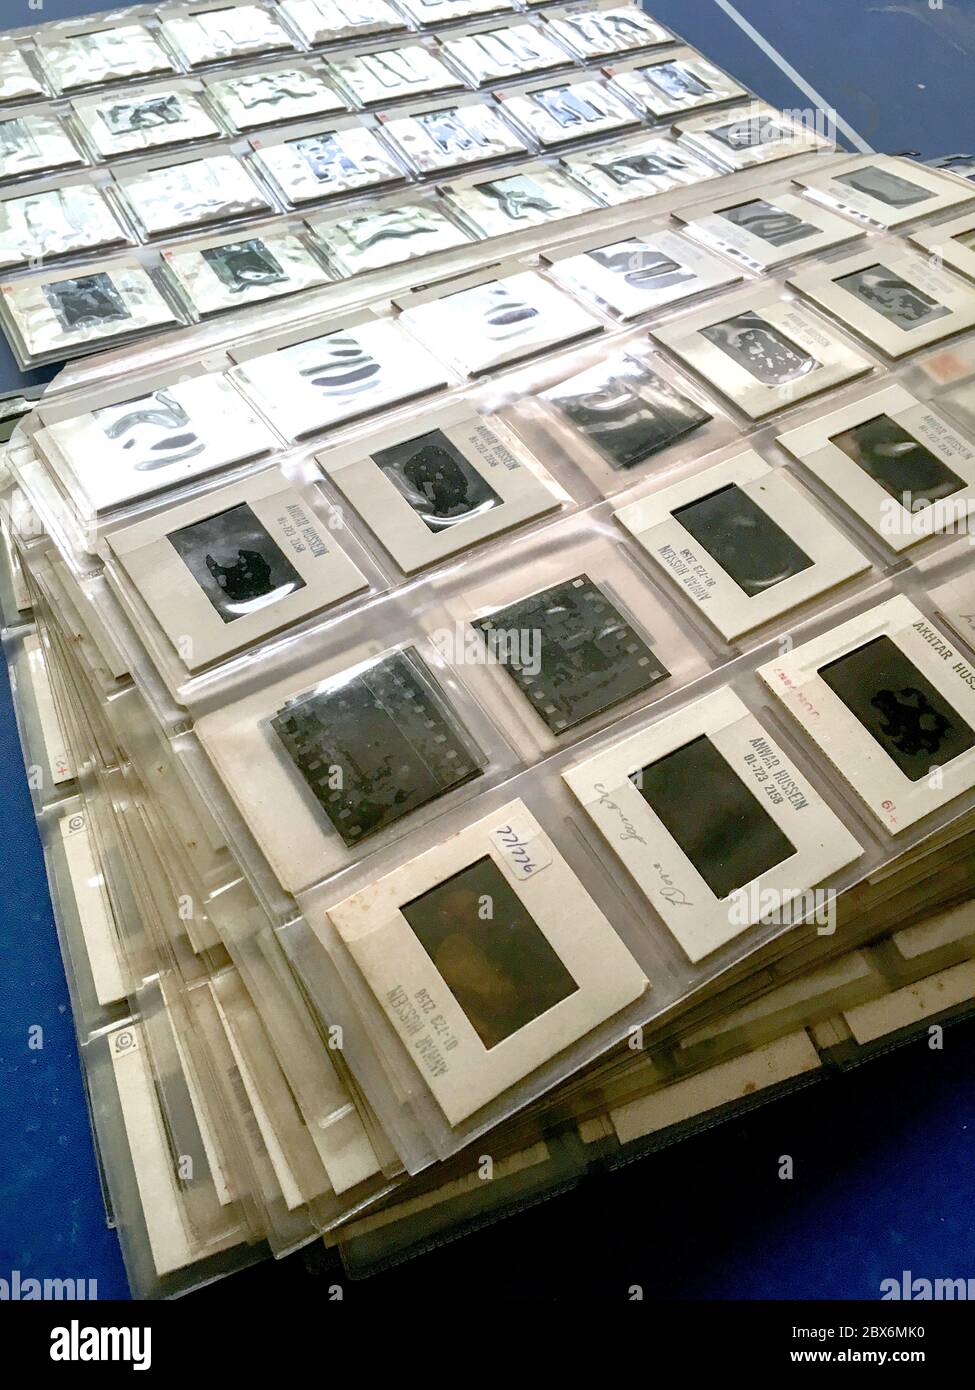 35mm colour photo transparencies stored and waiting for digital scanning.  Positive 35mm film made by Kodak, Fuji and others was a popular choice for  p Stock Photo - Alamy